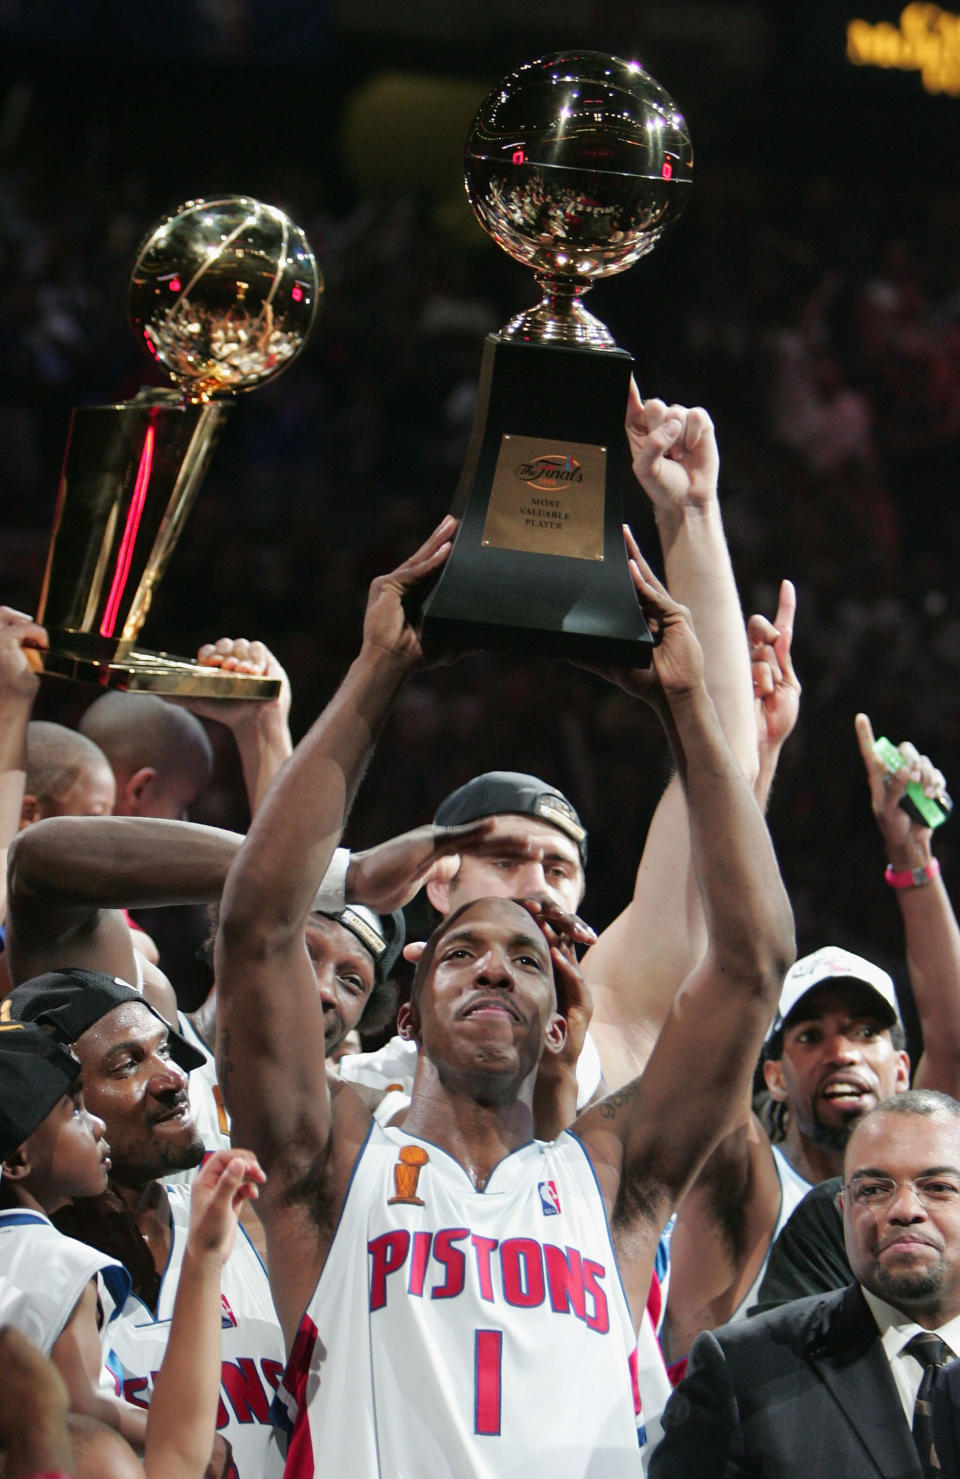 Chauncey Billups #1 of the Detroit Pistons holds up the most valuable player trophy after defeating the Los Angeles Lakers in game five of the 2004 NBA Finals on June 15, 2004 at The Palace of Auburn Hills in Auburn Hills, Michigan. The Pistons won 100-87. Billups was named MVP of the FInals.